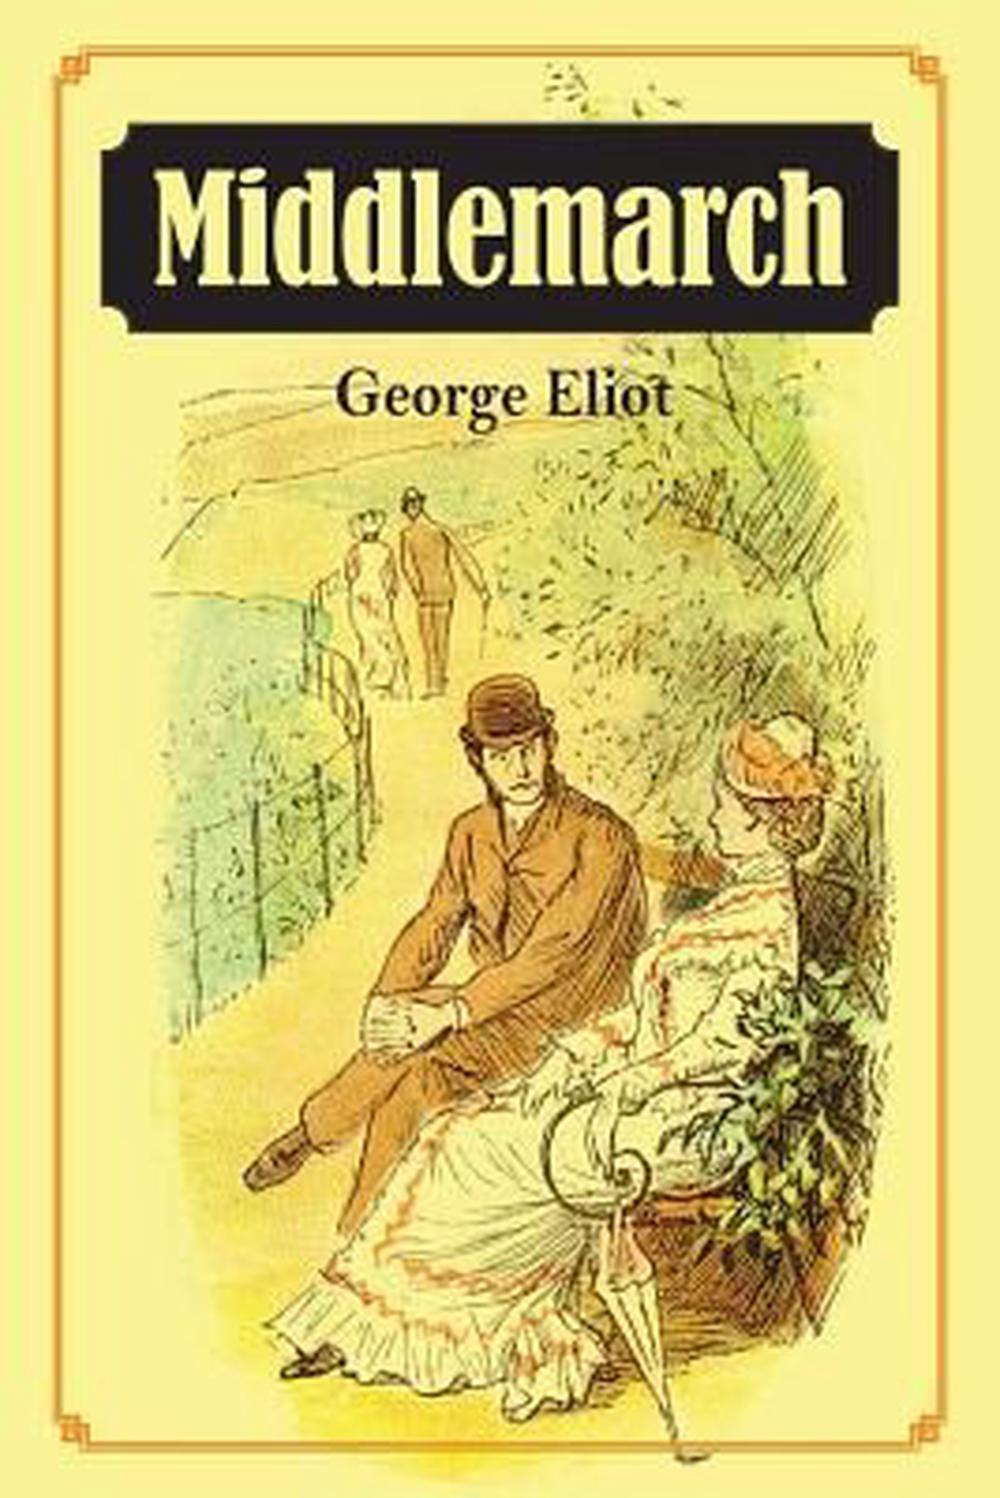 middlemarch author